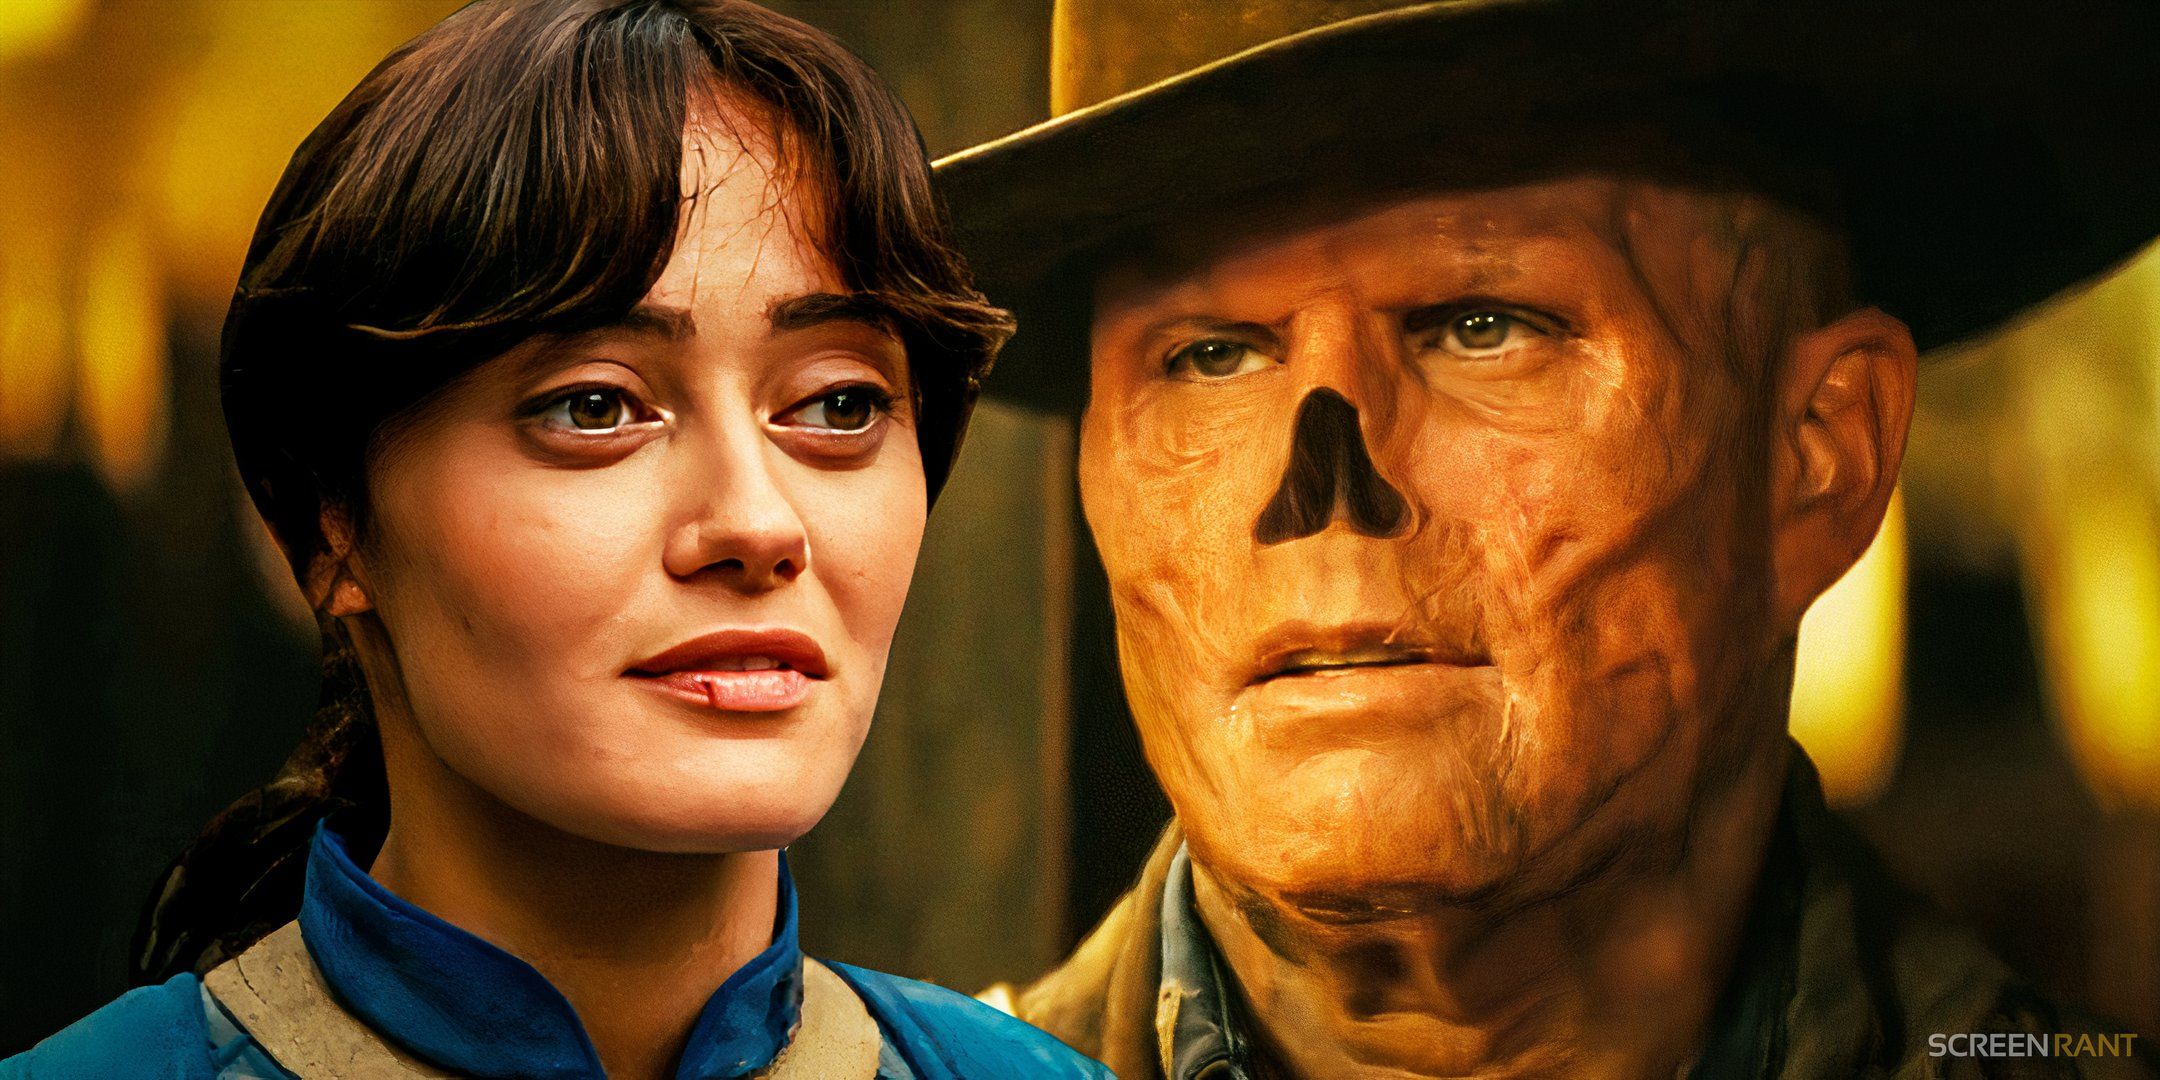 Ella Purnell as Lucy MacLean and Walter Goggins as The Ghoul from the Fallout show